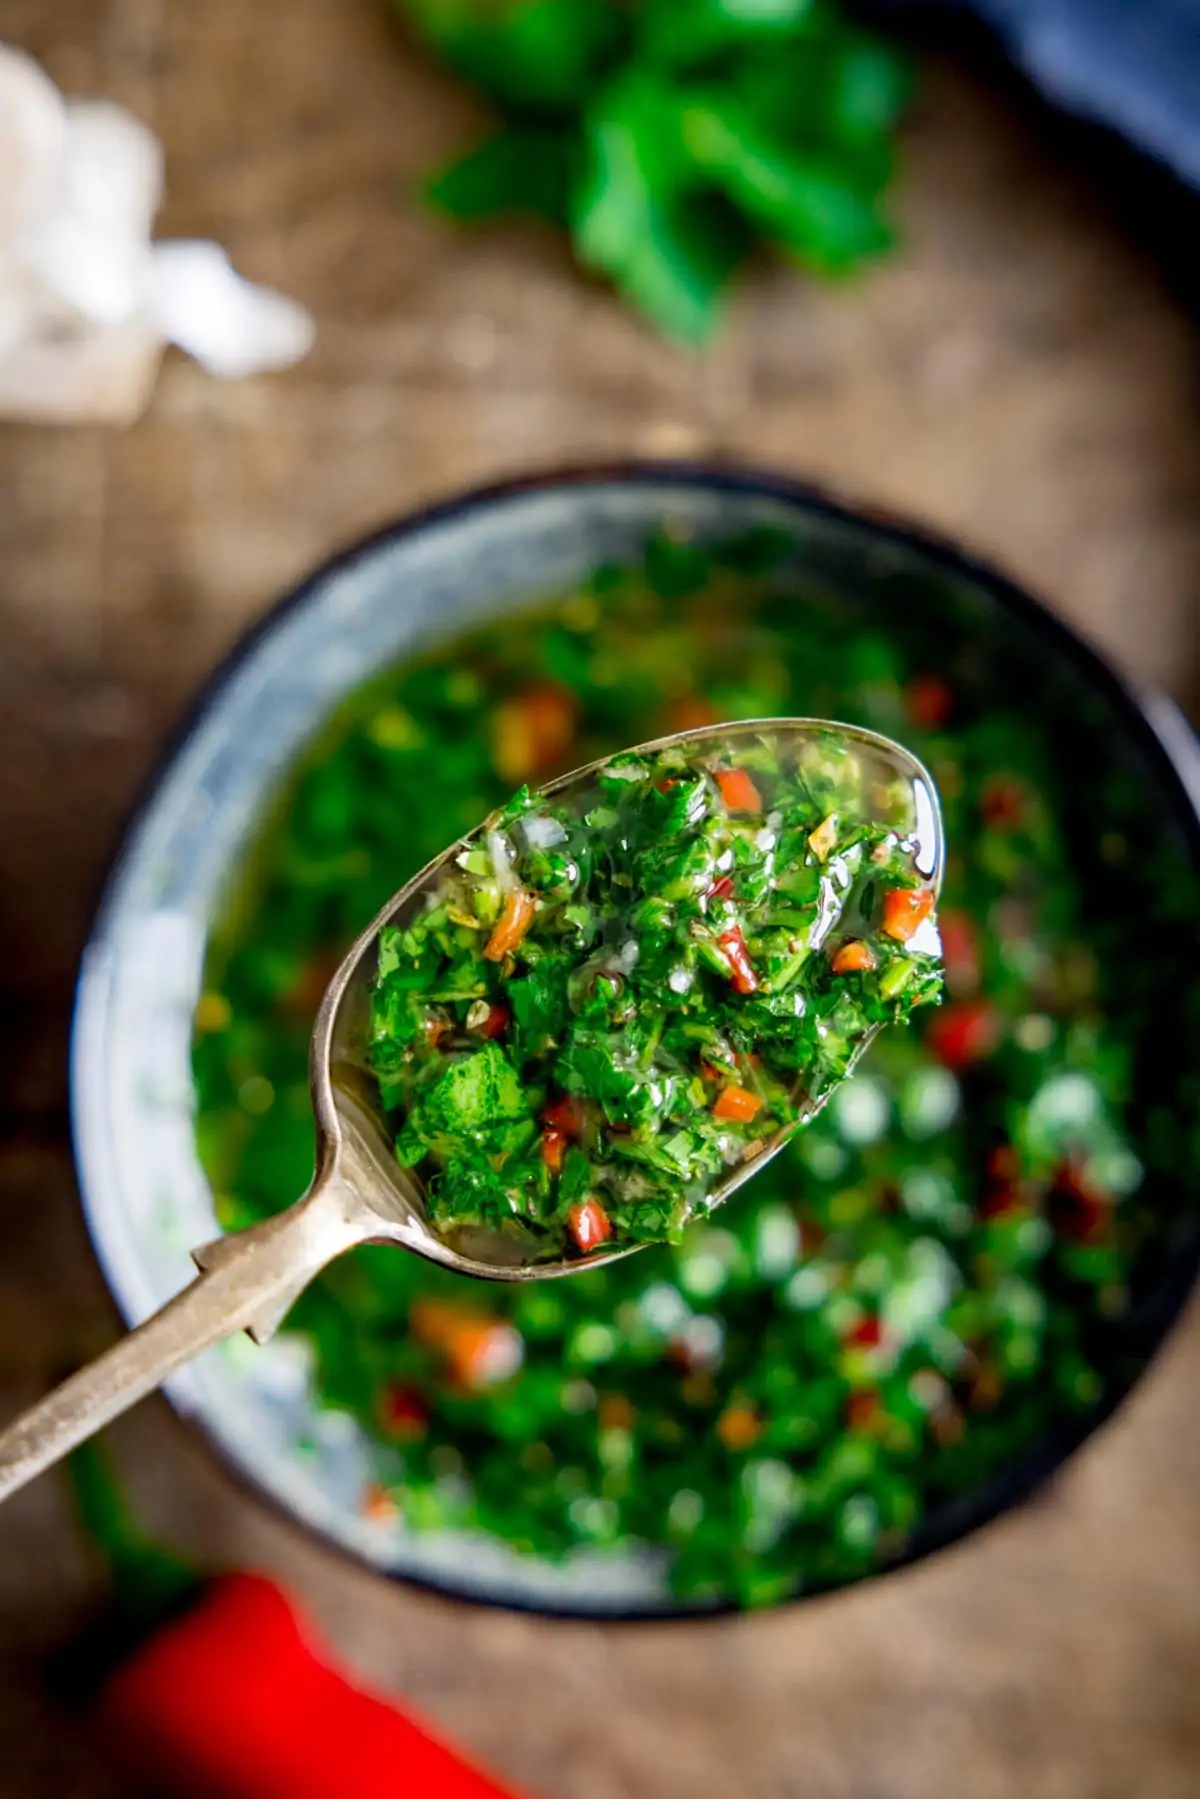 A close up of a spoon full of chimichurri sauce.